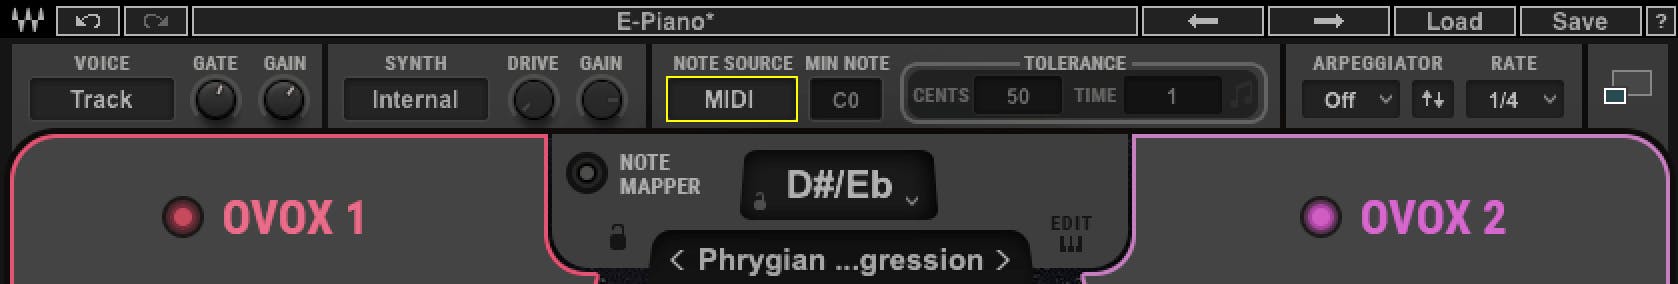 Inside OVox, make sure ‘Note Source’ is set to Auto or MIDI.